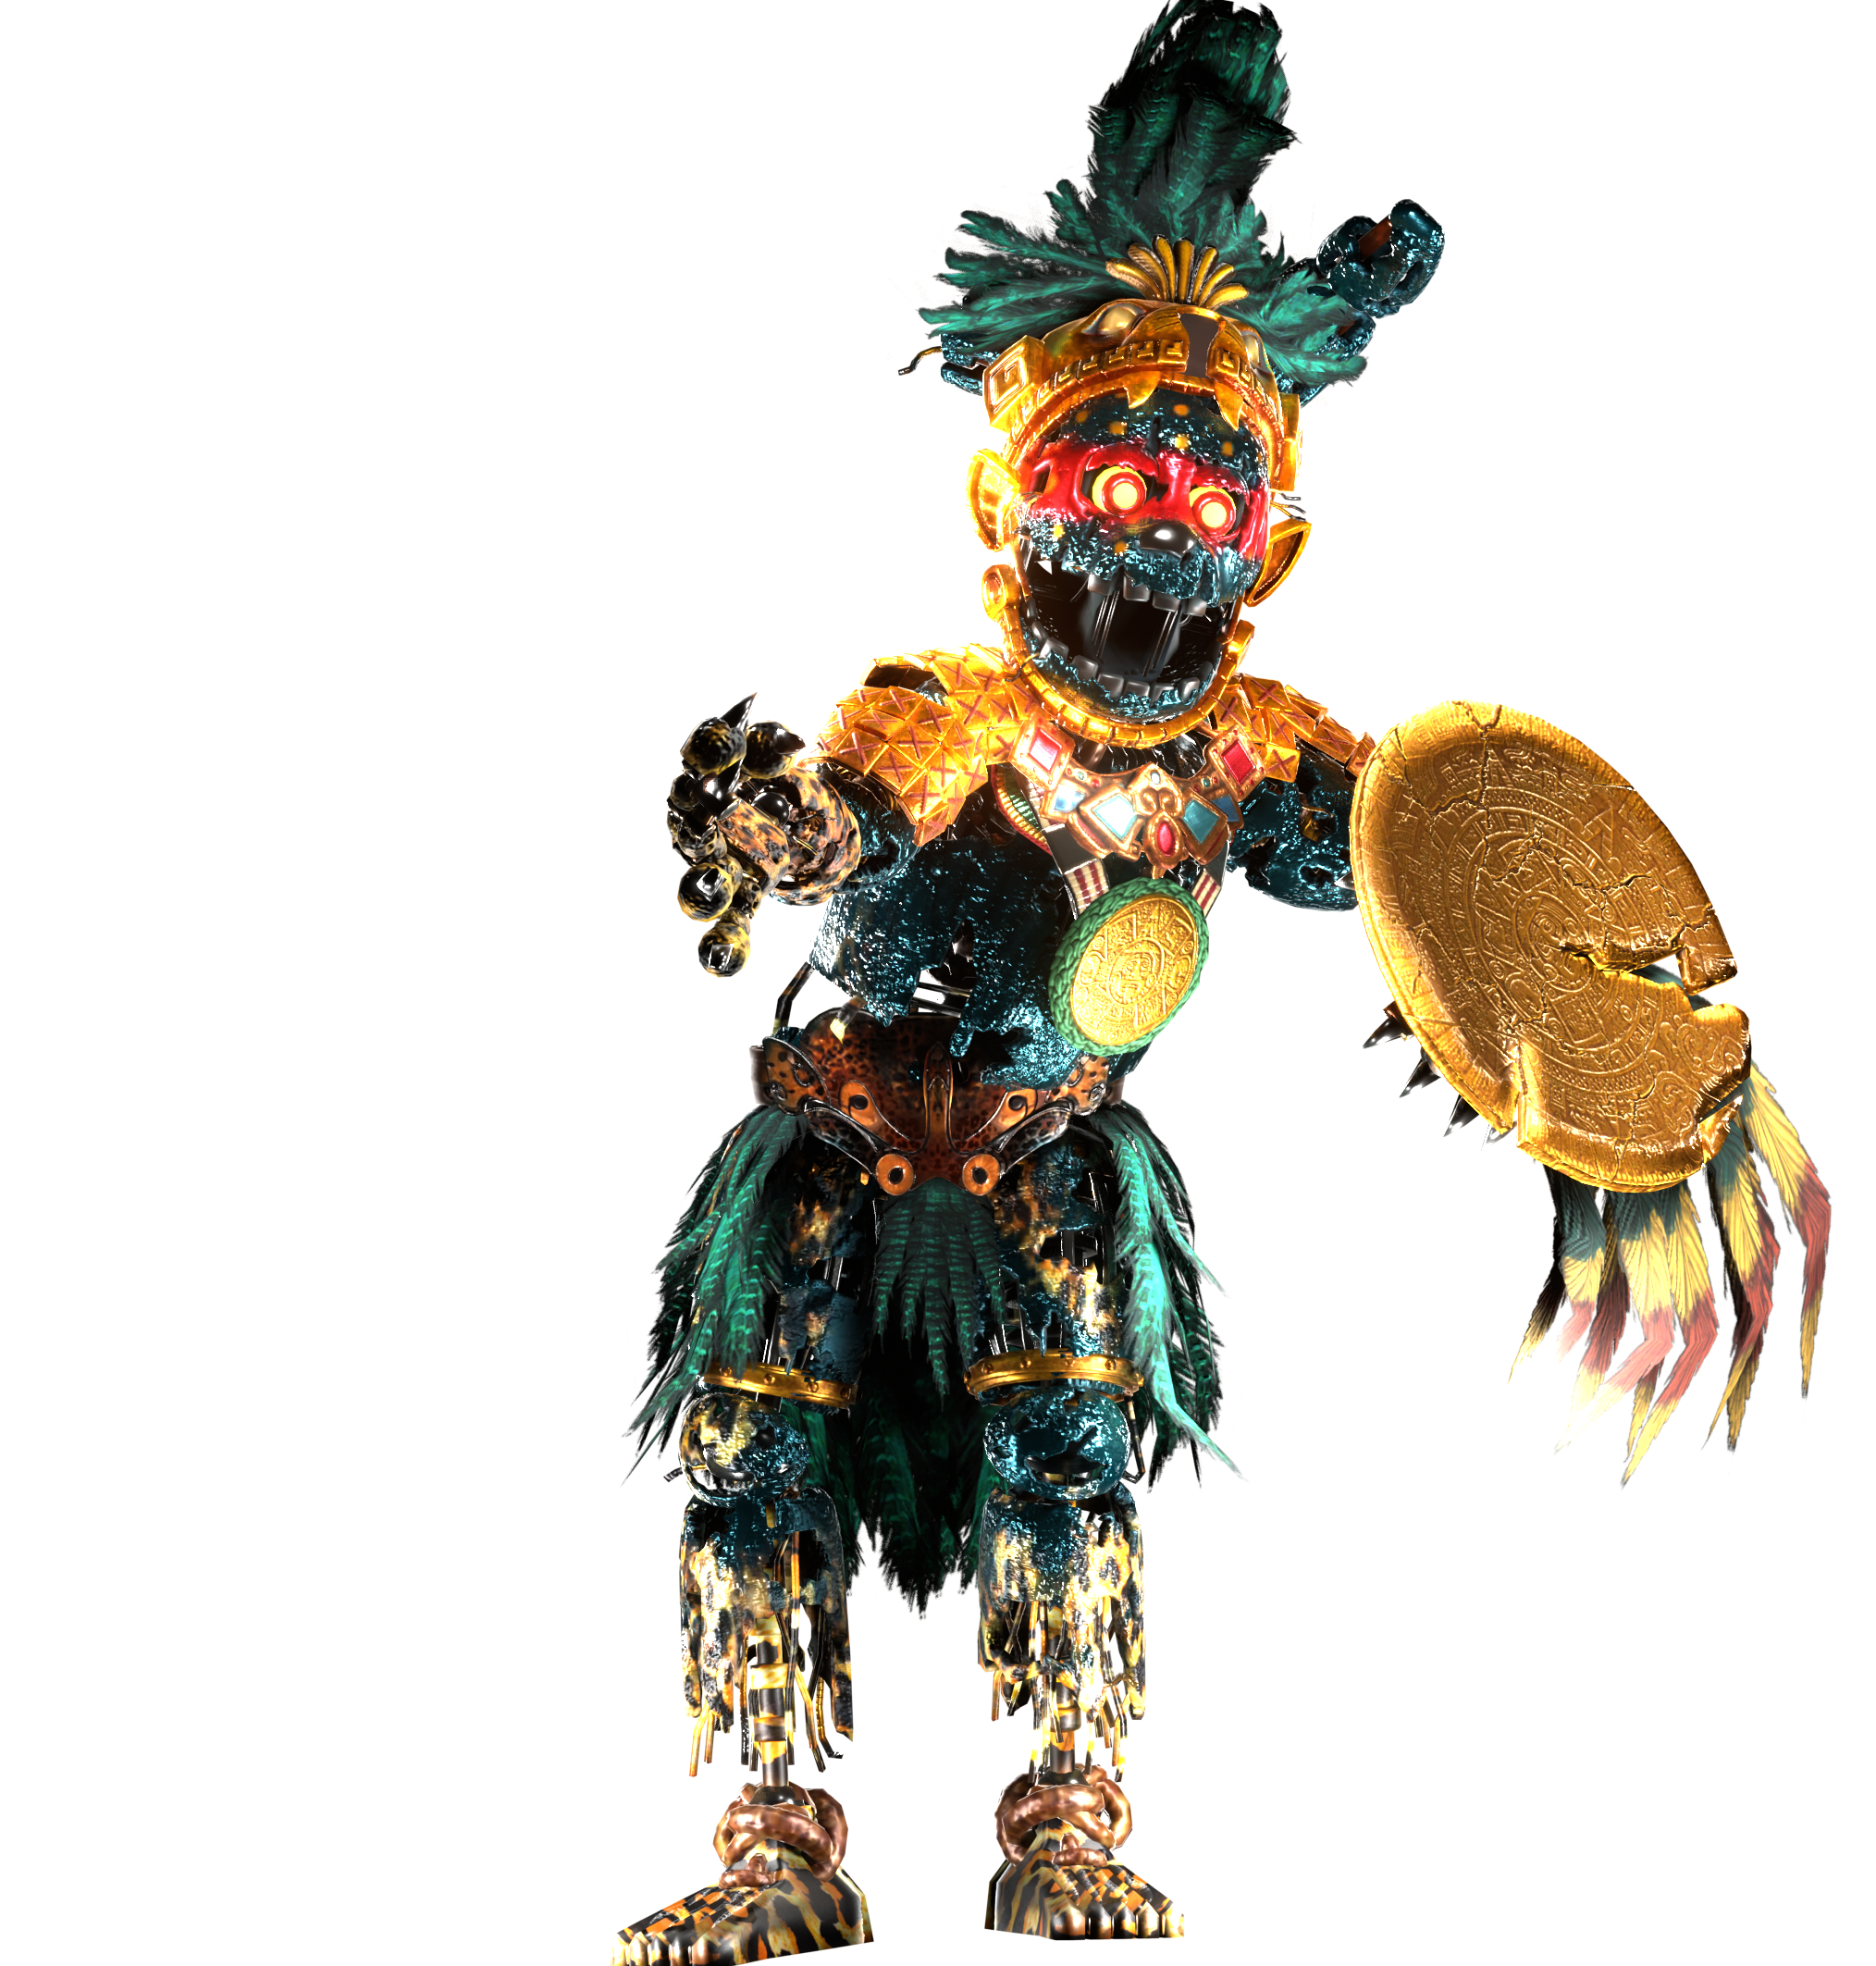 https://static.wikia.nocookie.net/five-nights-at-freddys-ar-special-delivery-wiki/images/1/14/CurseSpringtrapHarold.png/revision/latest?cb=20210508033654